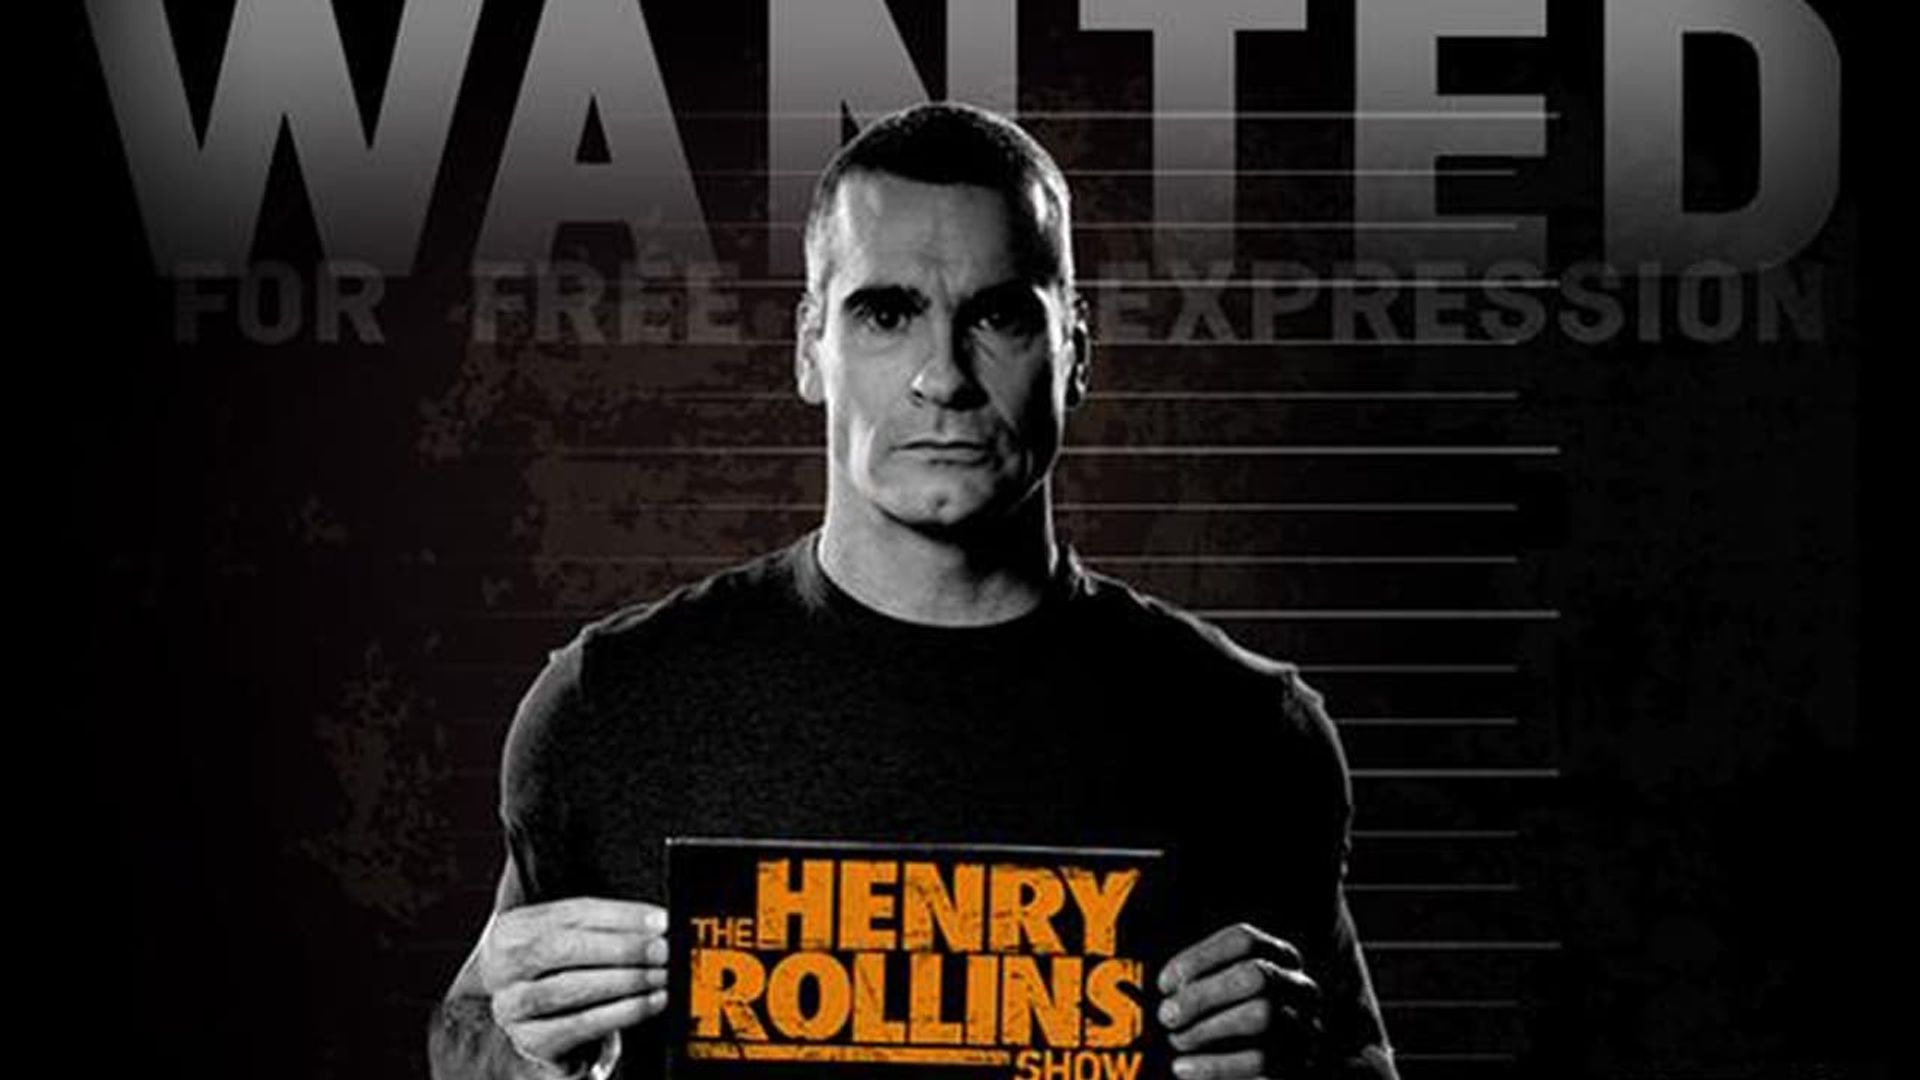 The Henry Rollins Show background